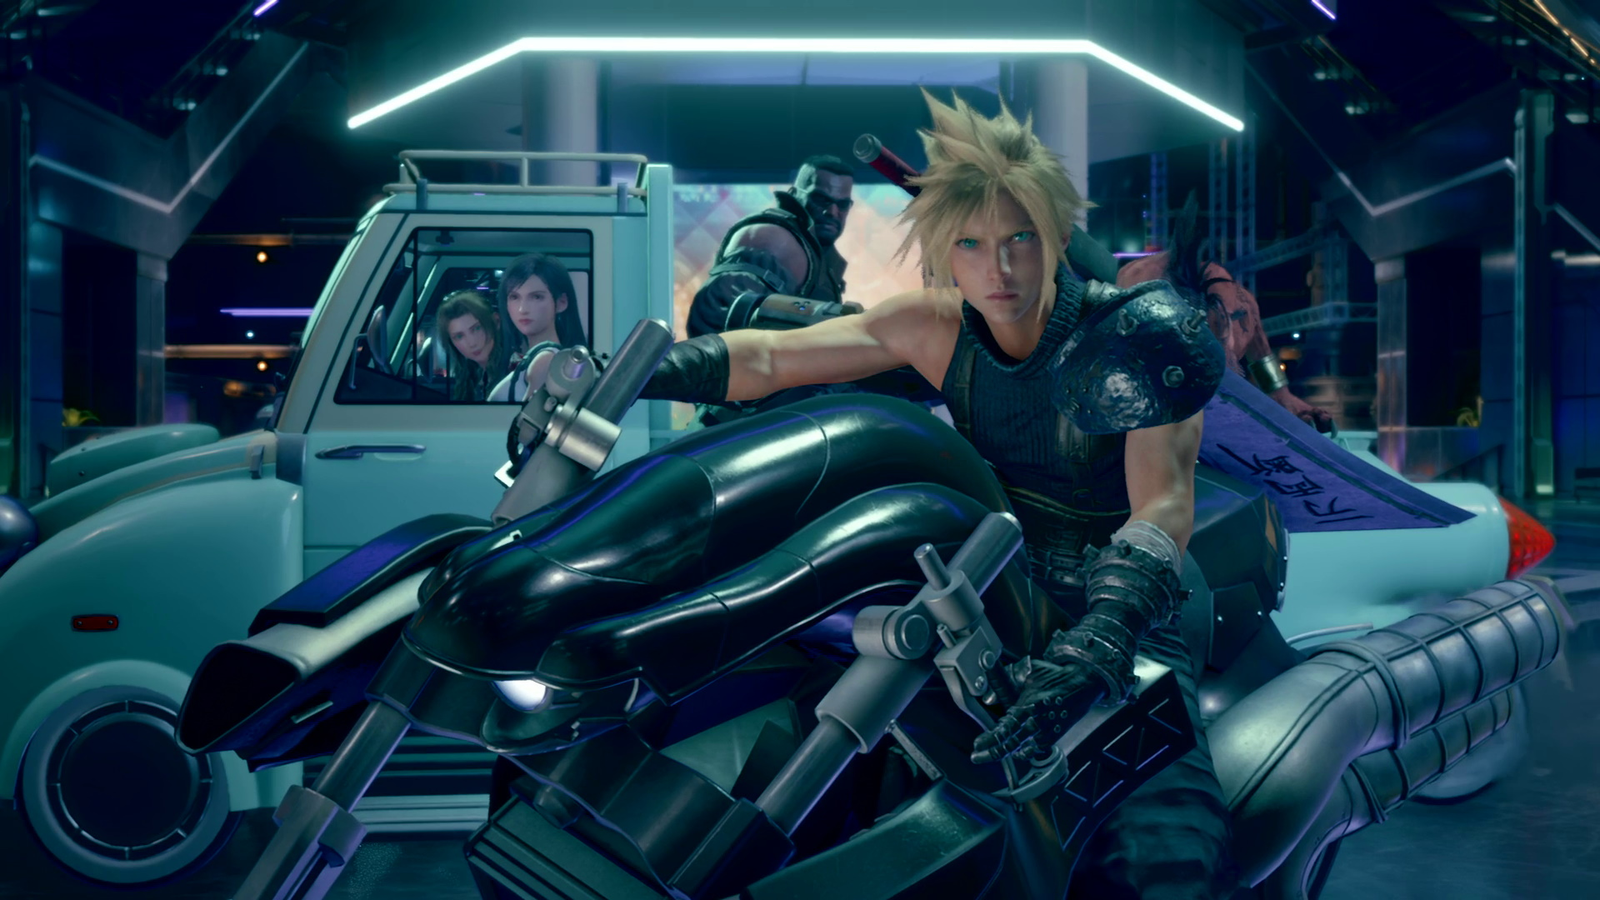 Please join me on the Final Fantasy VII Rebirth hype train